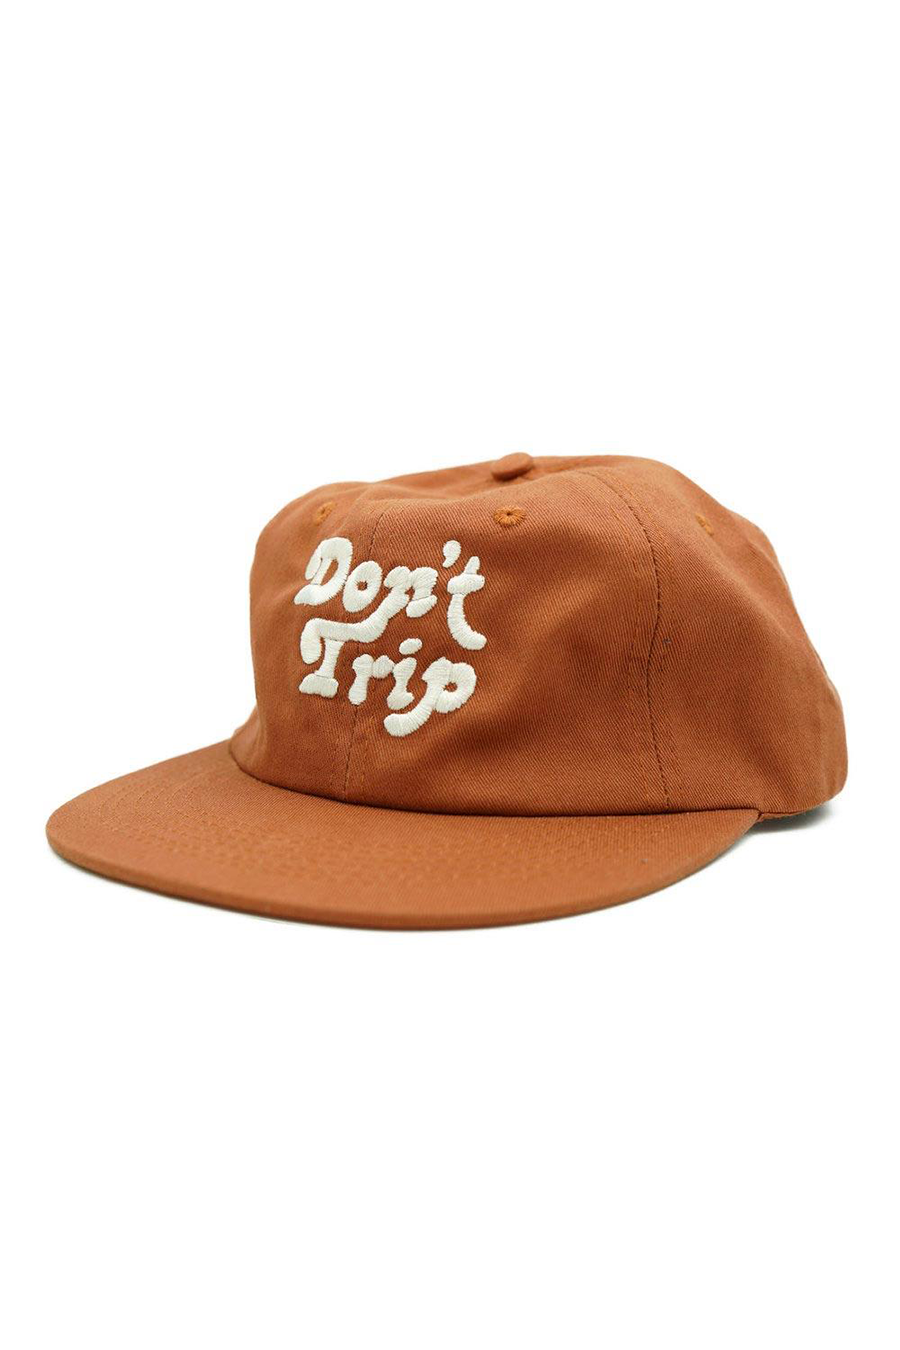 Don't Trip Unstructured Hat | Rust - Main Image Number 1 of 1